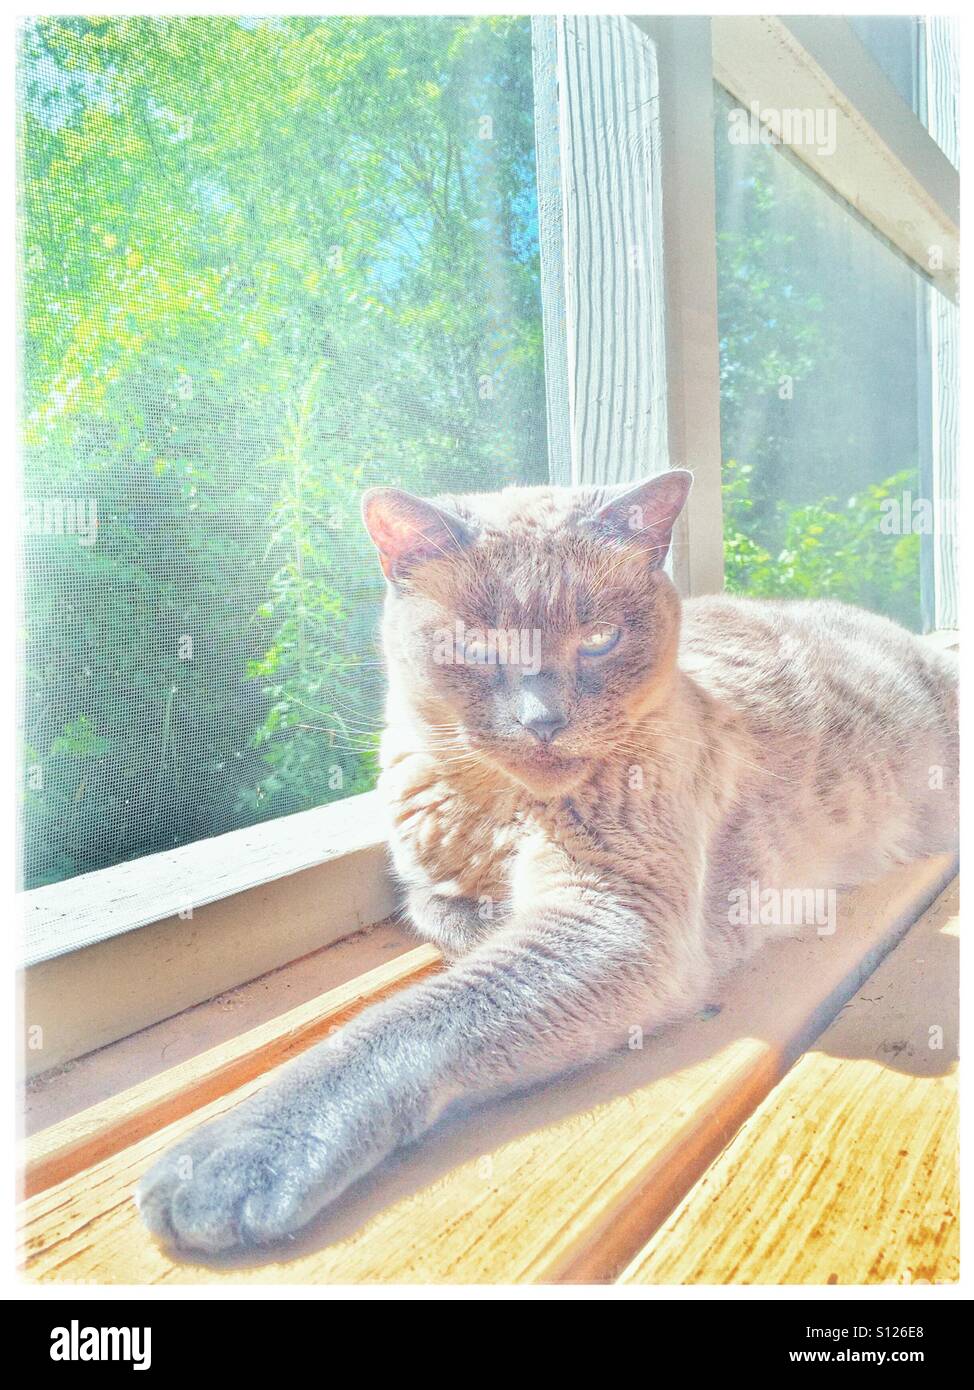 Siamese cat sun bathing on a screened in porch Stock Photo